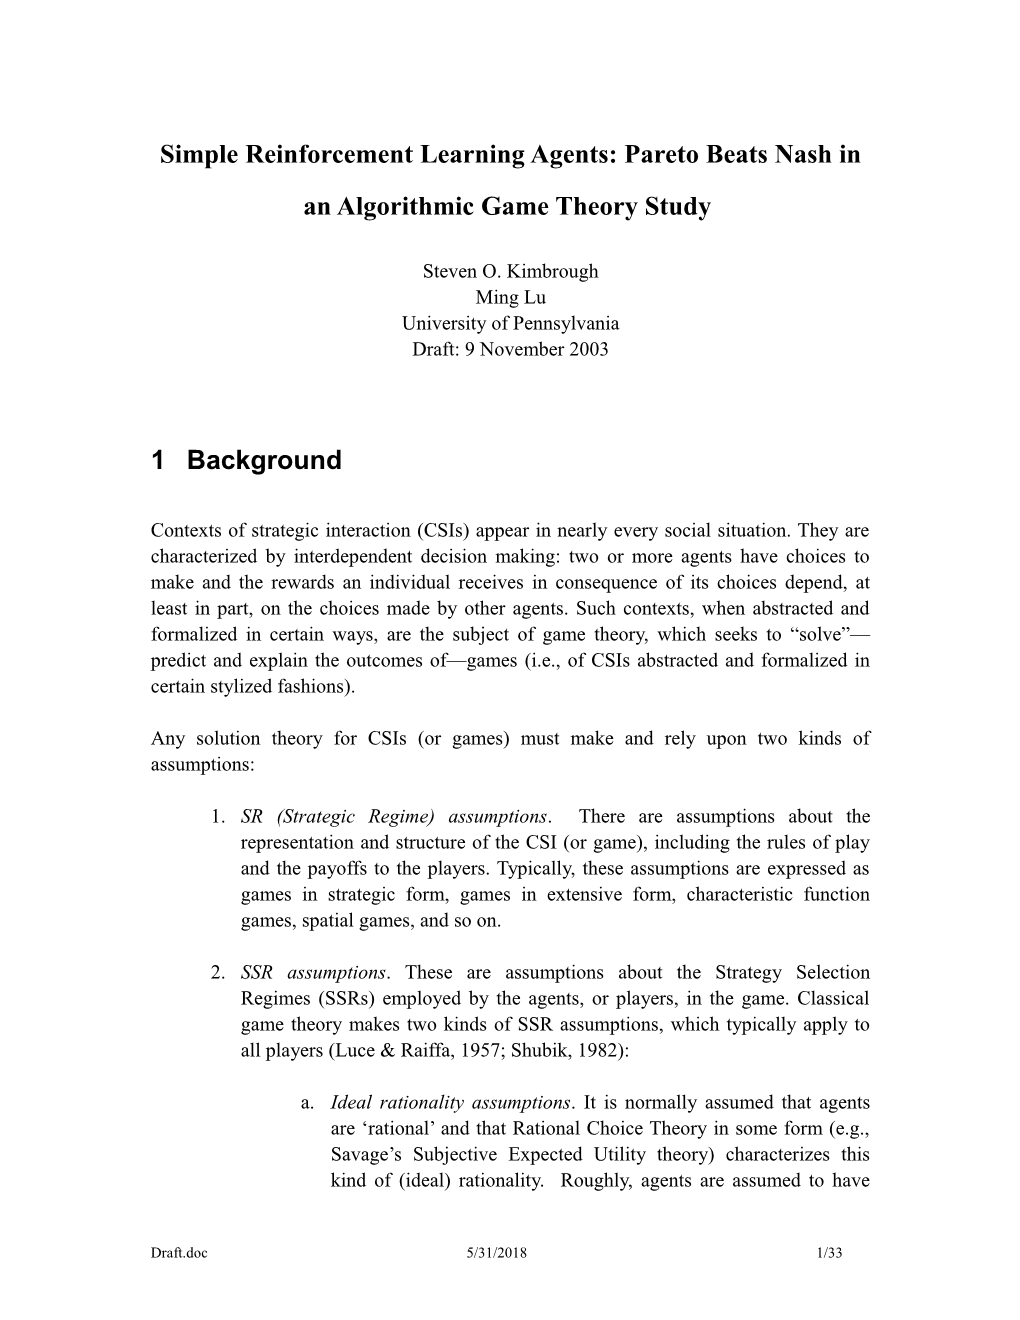 Simple Reinforcement Learning Agents: Pareto Beats Nash in an Algorithmic Game Theory Study